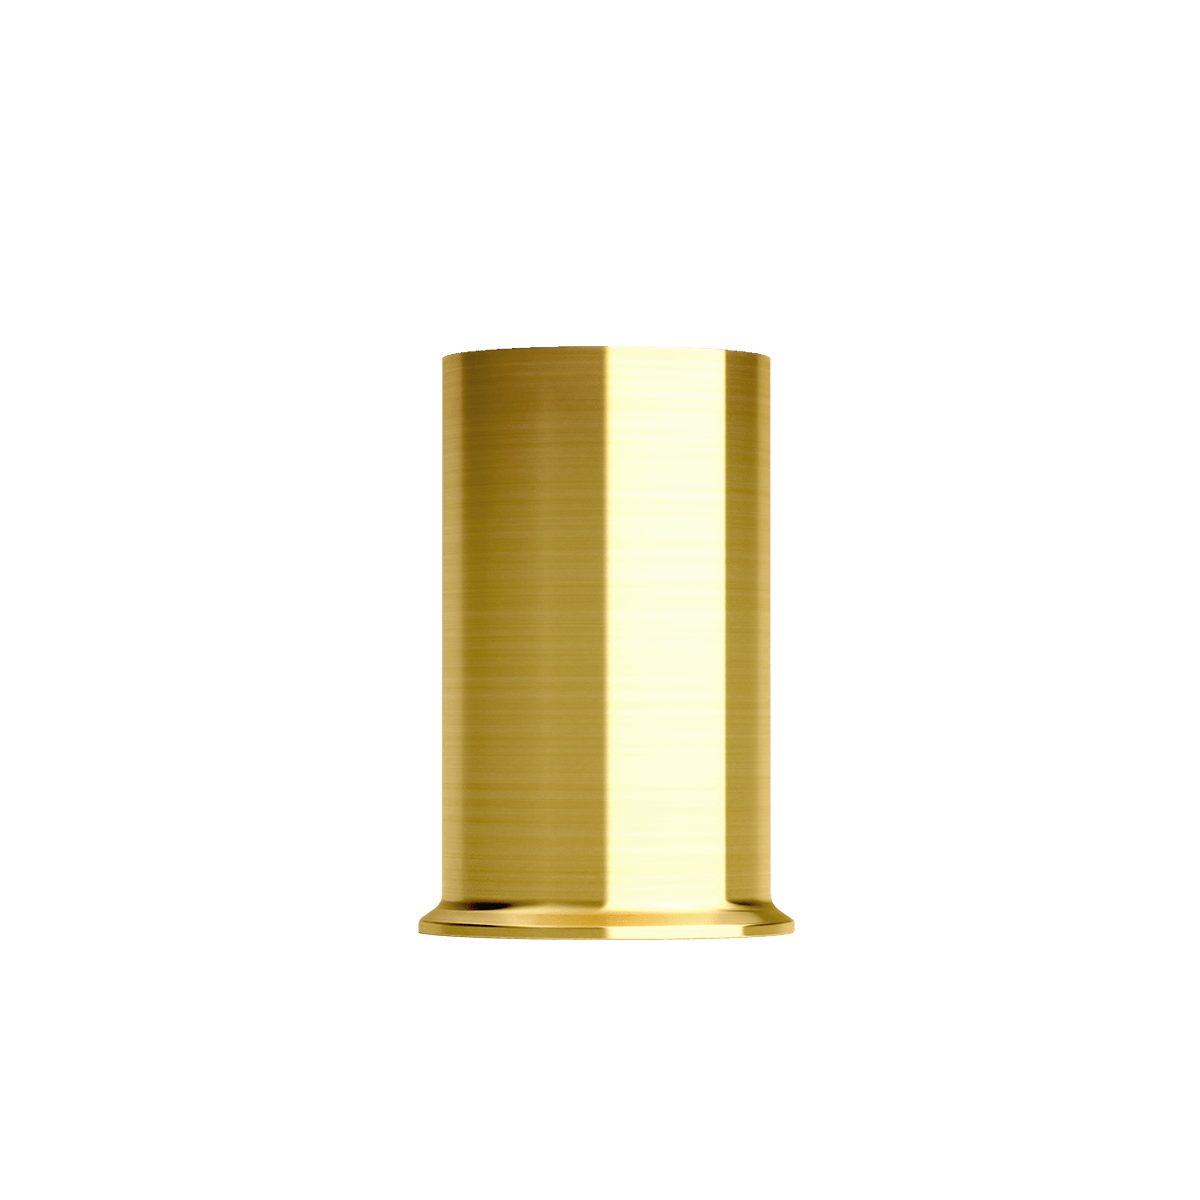 variant_600205% | Ambience - London base - Brass 10 | SACKit